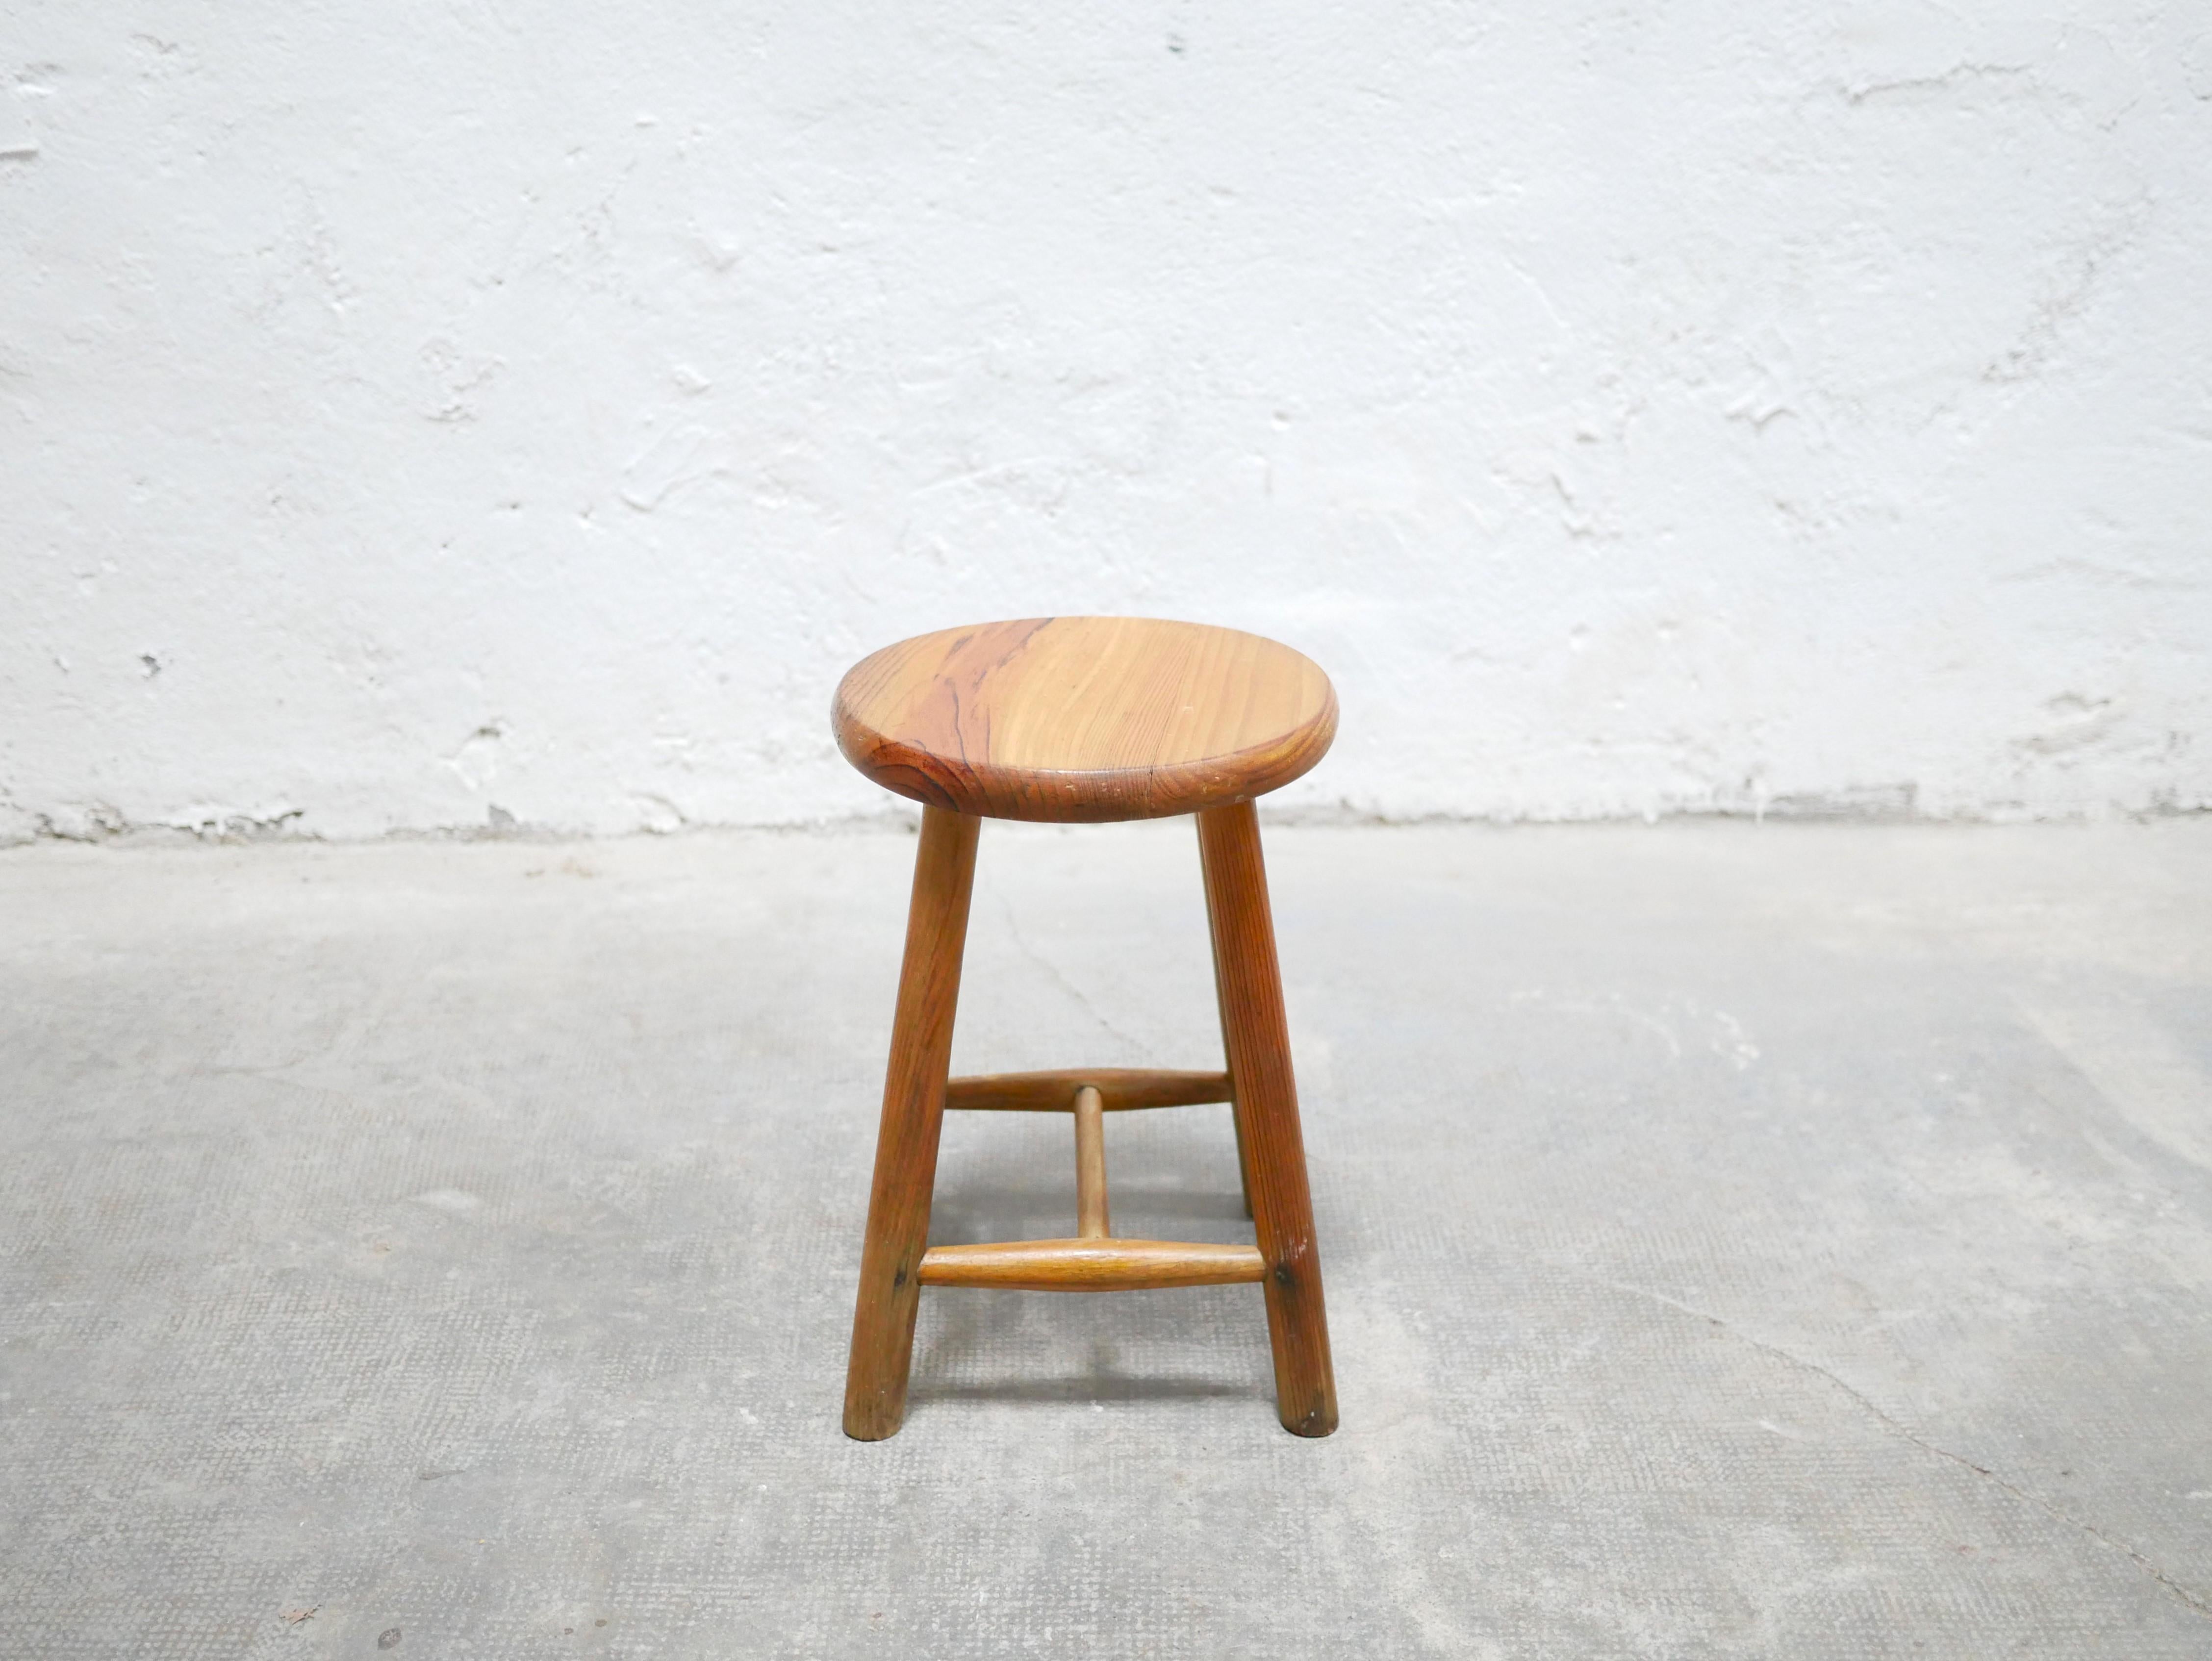 Pine stool from the 60s.

Its color is bright and warm, its lines are trendy and modern.
Aesthetic, stable, solid and practical, the stool will easily find its place in the living room as a side table or support for plants, in the bedroom as a